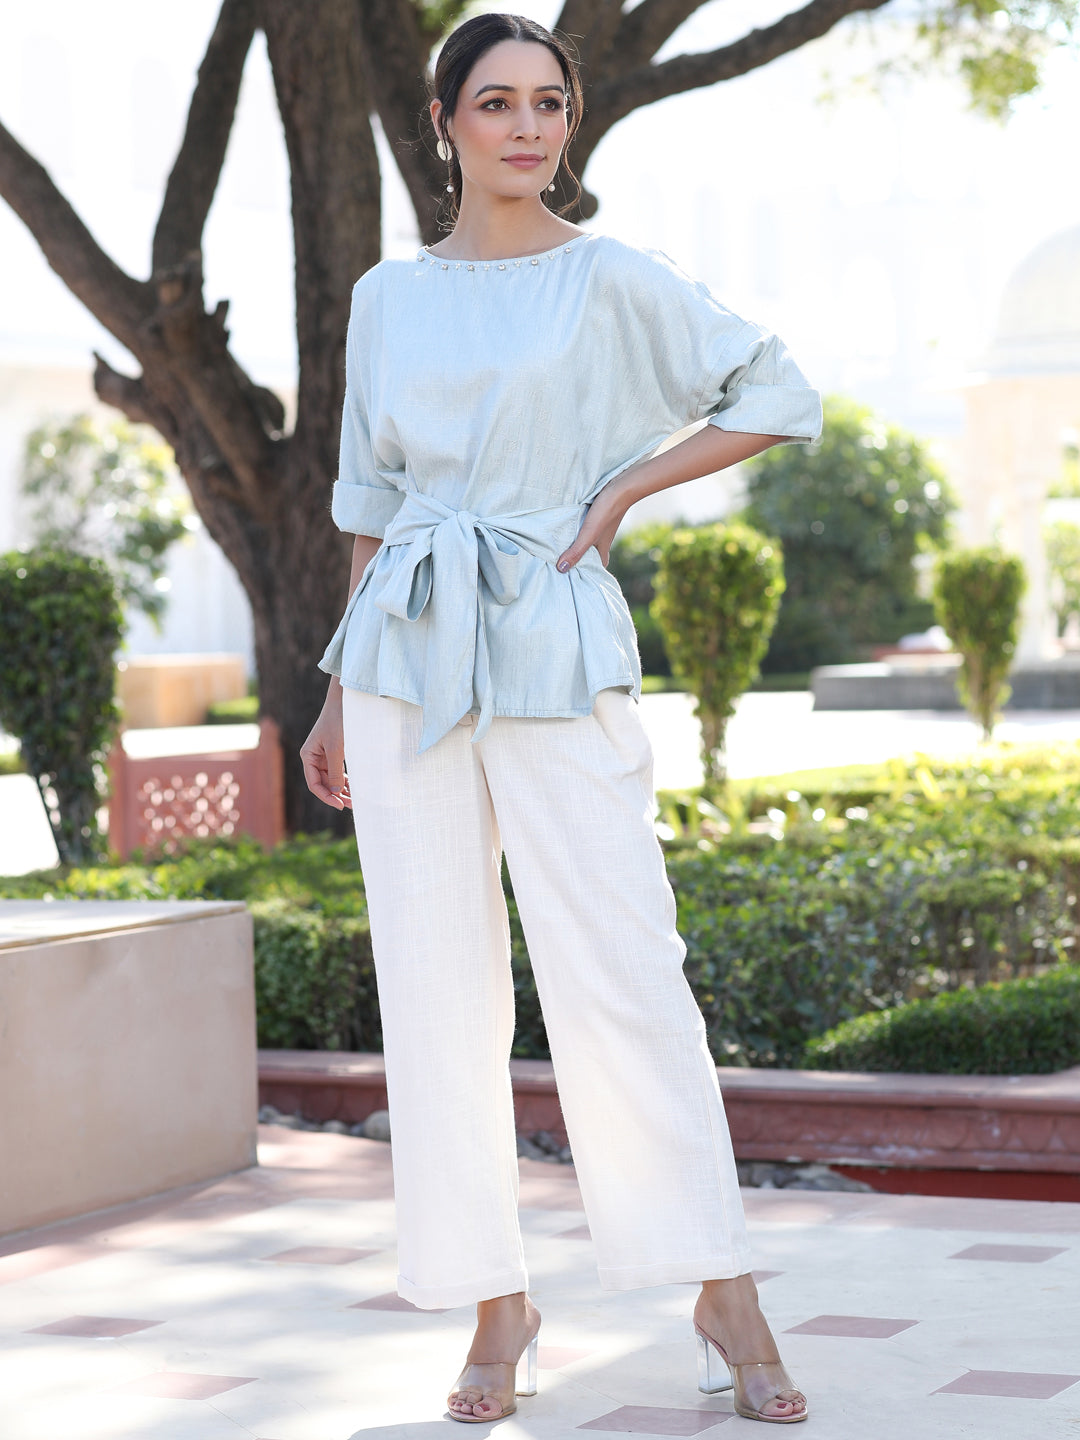 A Light Blue Color Self Weaved Embellished Top With Tie-Up At The Waist And Extended Sleeves Top With Cotton White Flared Pants